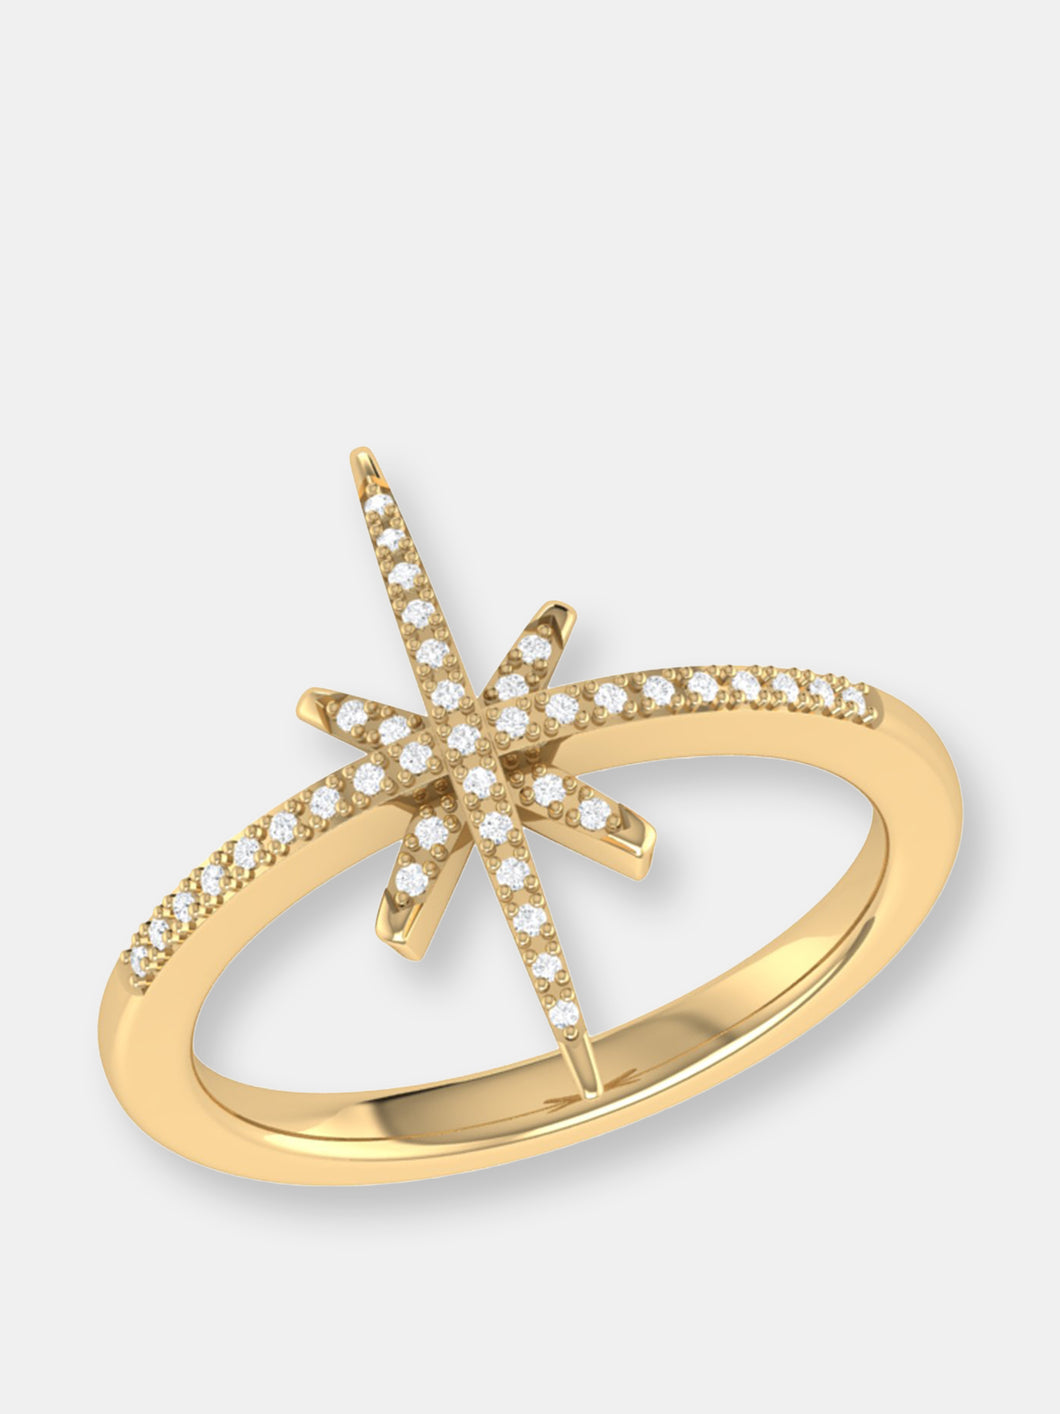 Twinkle Star Diamond Ring In 14K Yellow Gold Vermeil On Sterling Silver